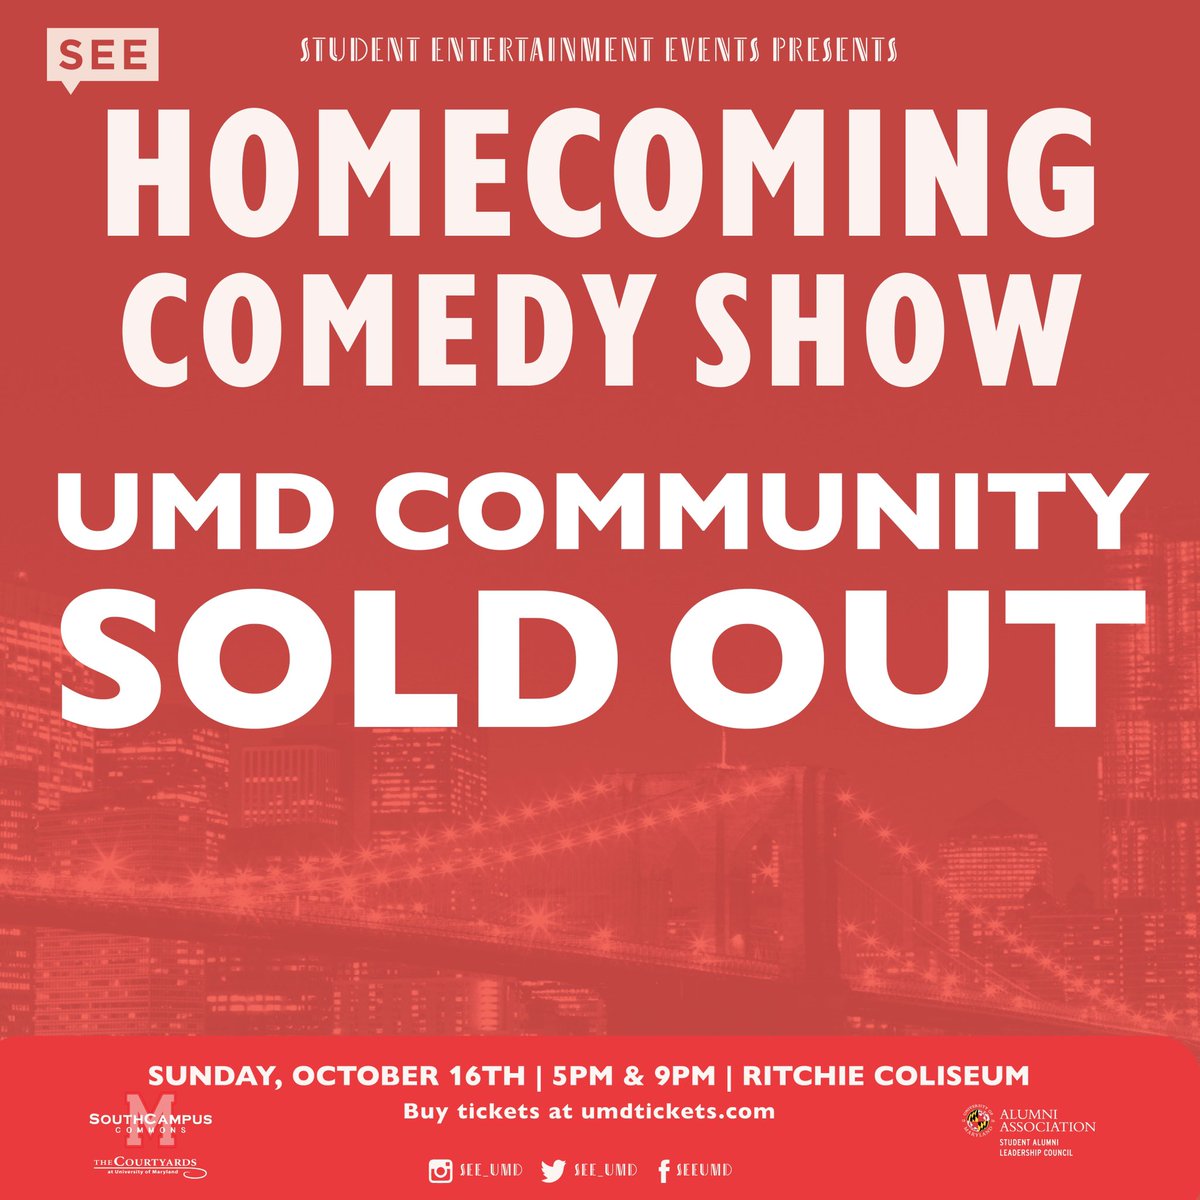 Thank you to everyone who got tickets to Homecoming Comedy Show ft. Colin Jost! UMD Community Tickets are officially SOLD OUT! General public tickets are STILL AVAILABLE and can be purchased at https://t.co/oqPSFTsZGI. Go fast!! #ThisIsSEE #SEEUMD #UniversityOfMaryland https://t.co/JMkWwkAj7g